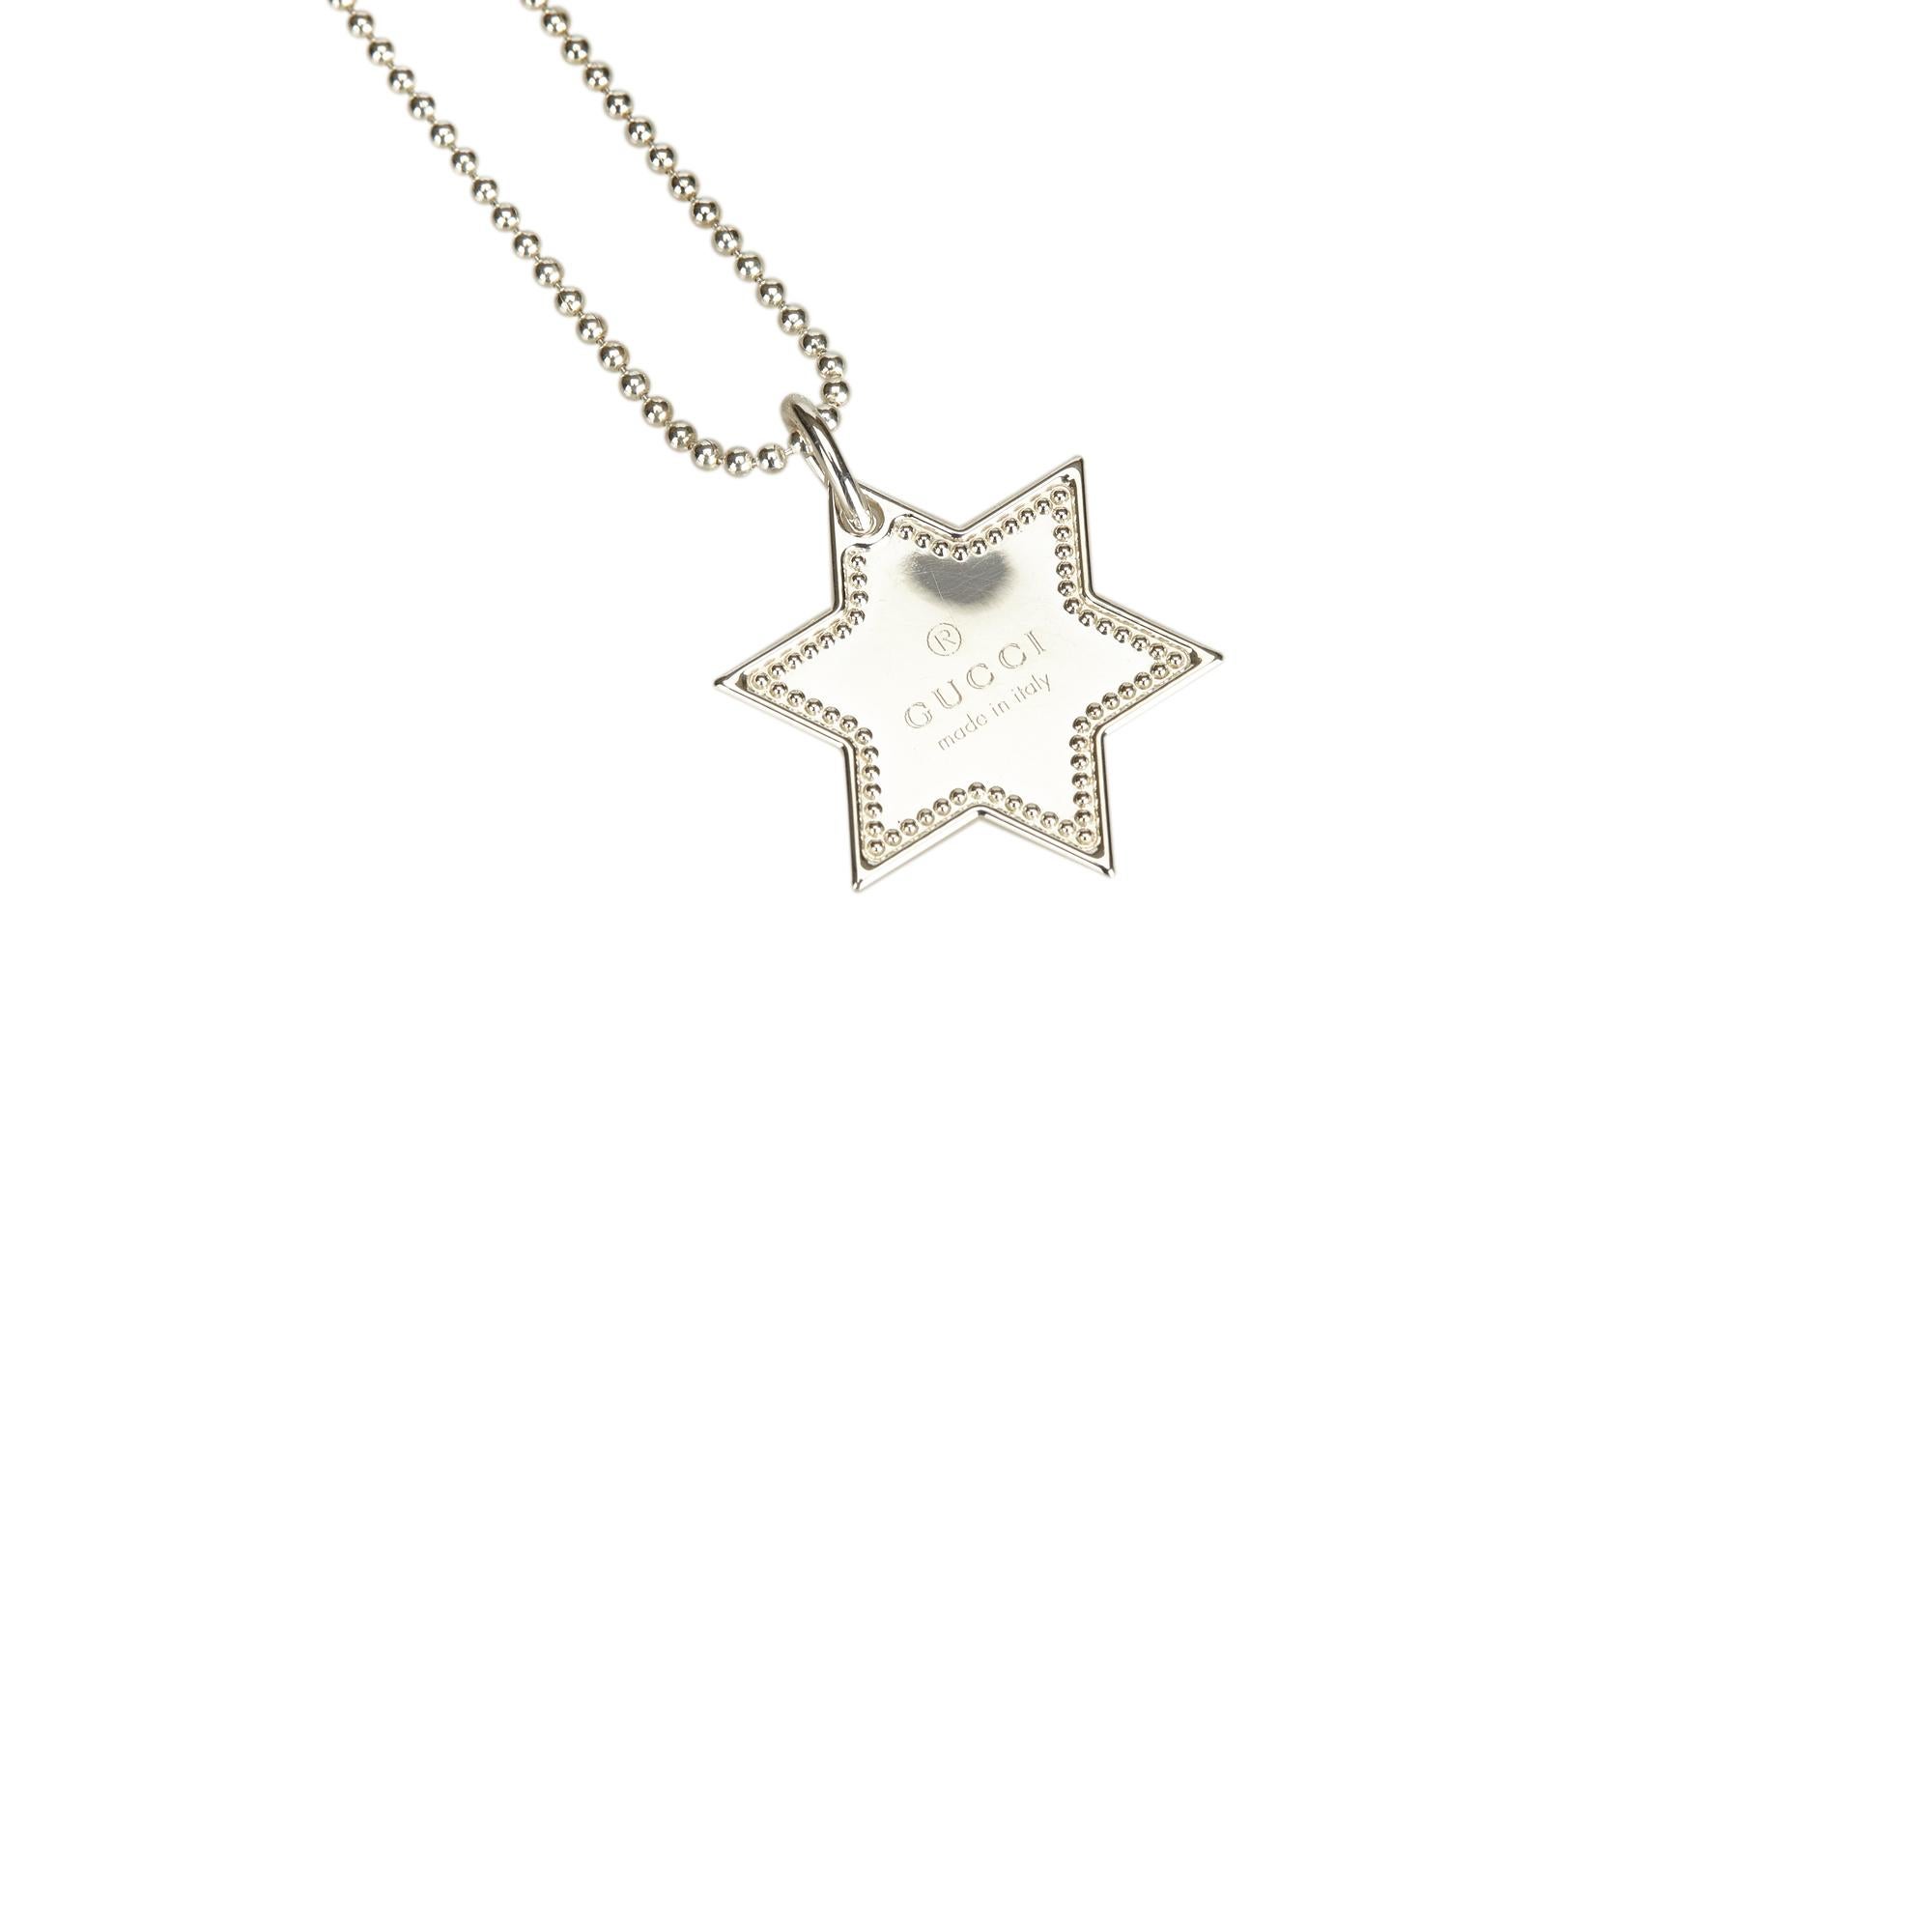 This necklace features a star-shaped dog tag pendant, silver-toned bead neck chain, and a lobster claw closure. It carries as AB condition rating.

Inclusions: 
Dust Bag
 Sterling Silver
Country of Origin: Italy

Order Processing Time: Please allow